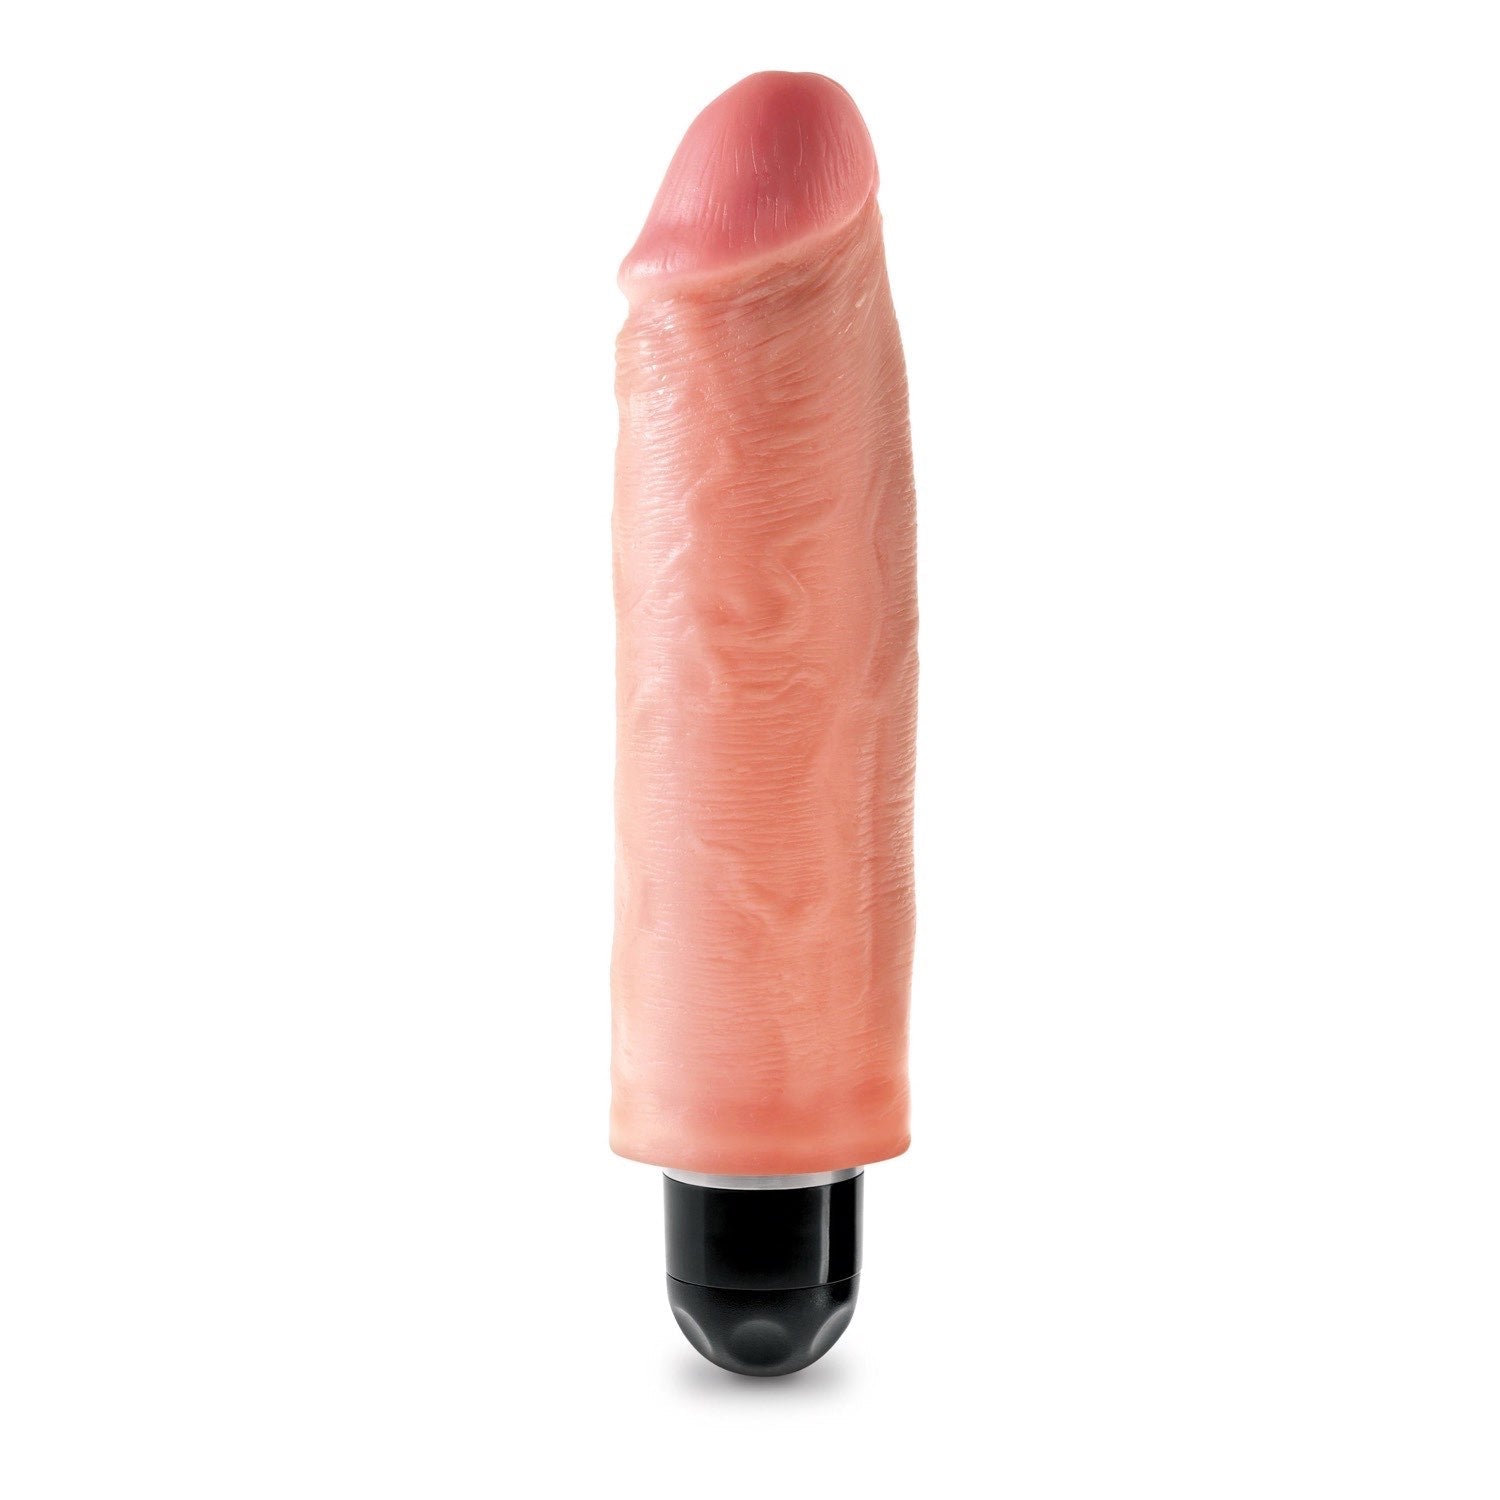 King Cock 6&quot; Vibrating Stiffy - Flesh 15.2 cm Vibrating Dong by Pipedream